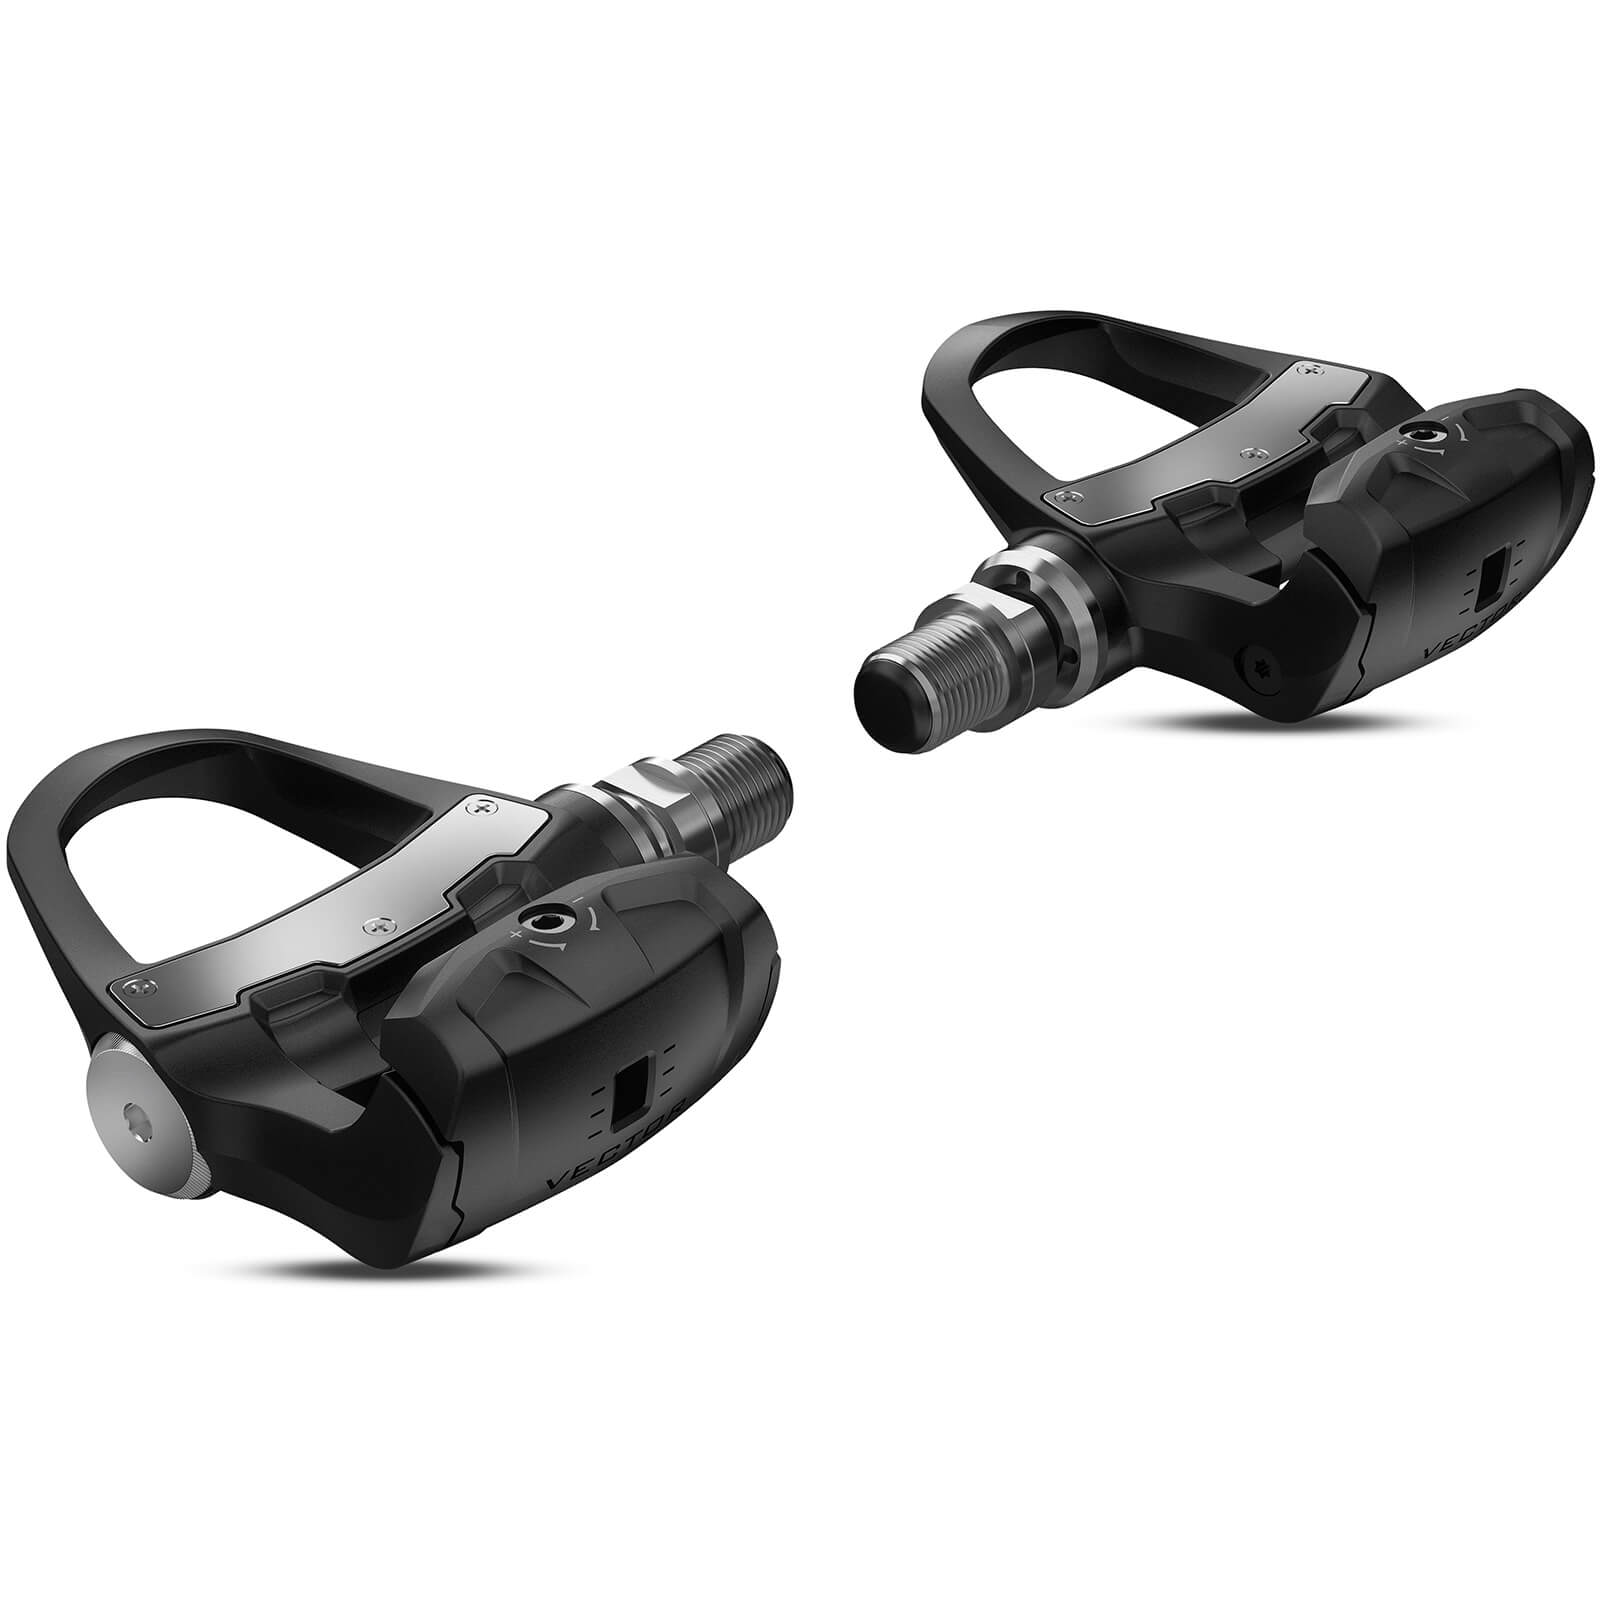 Garmin Vector 3 Dual Side Power Meter Pedals – Reconditioned